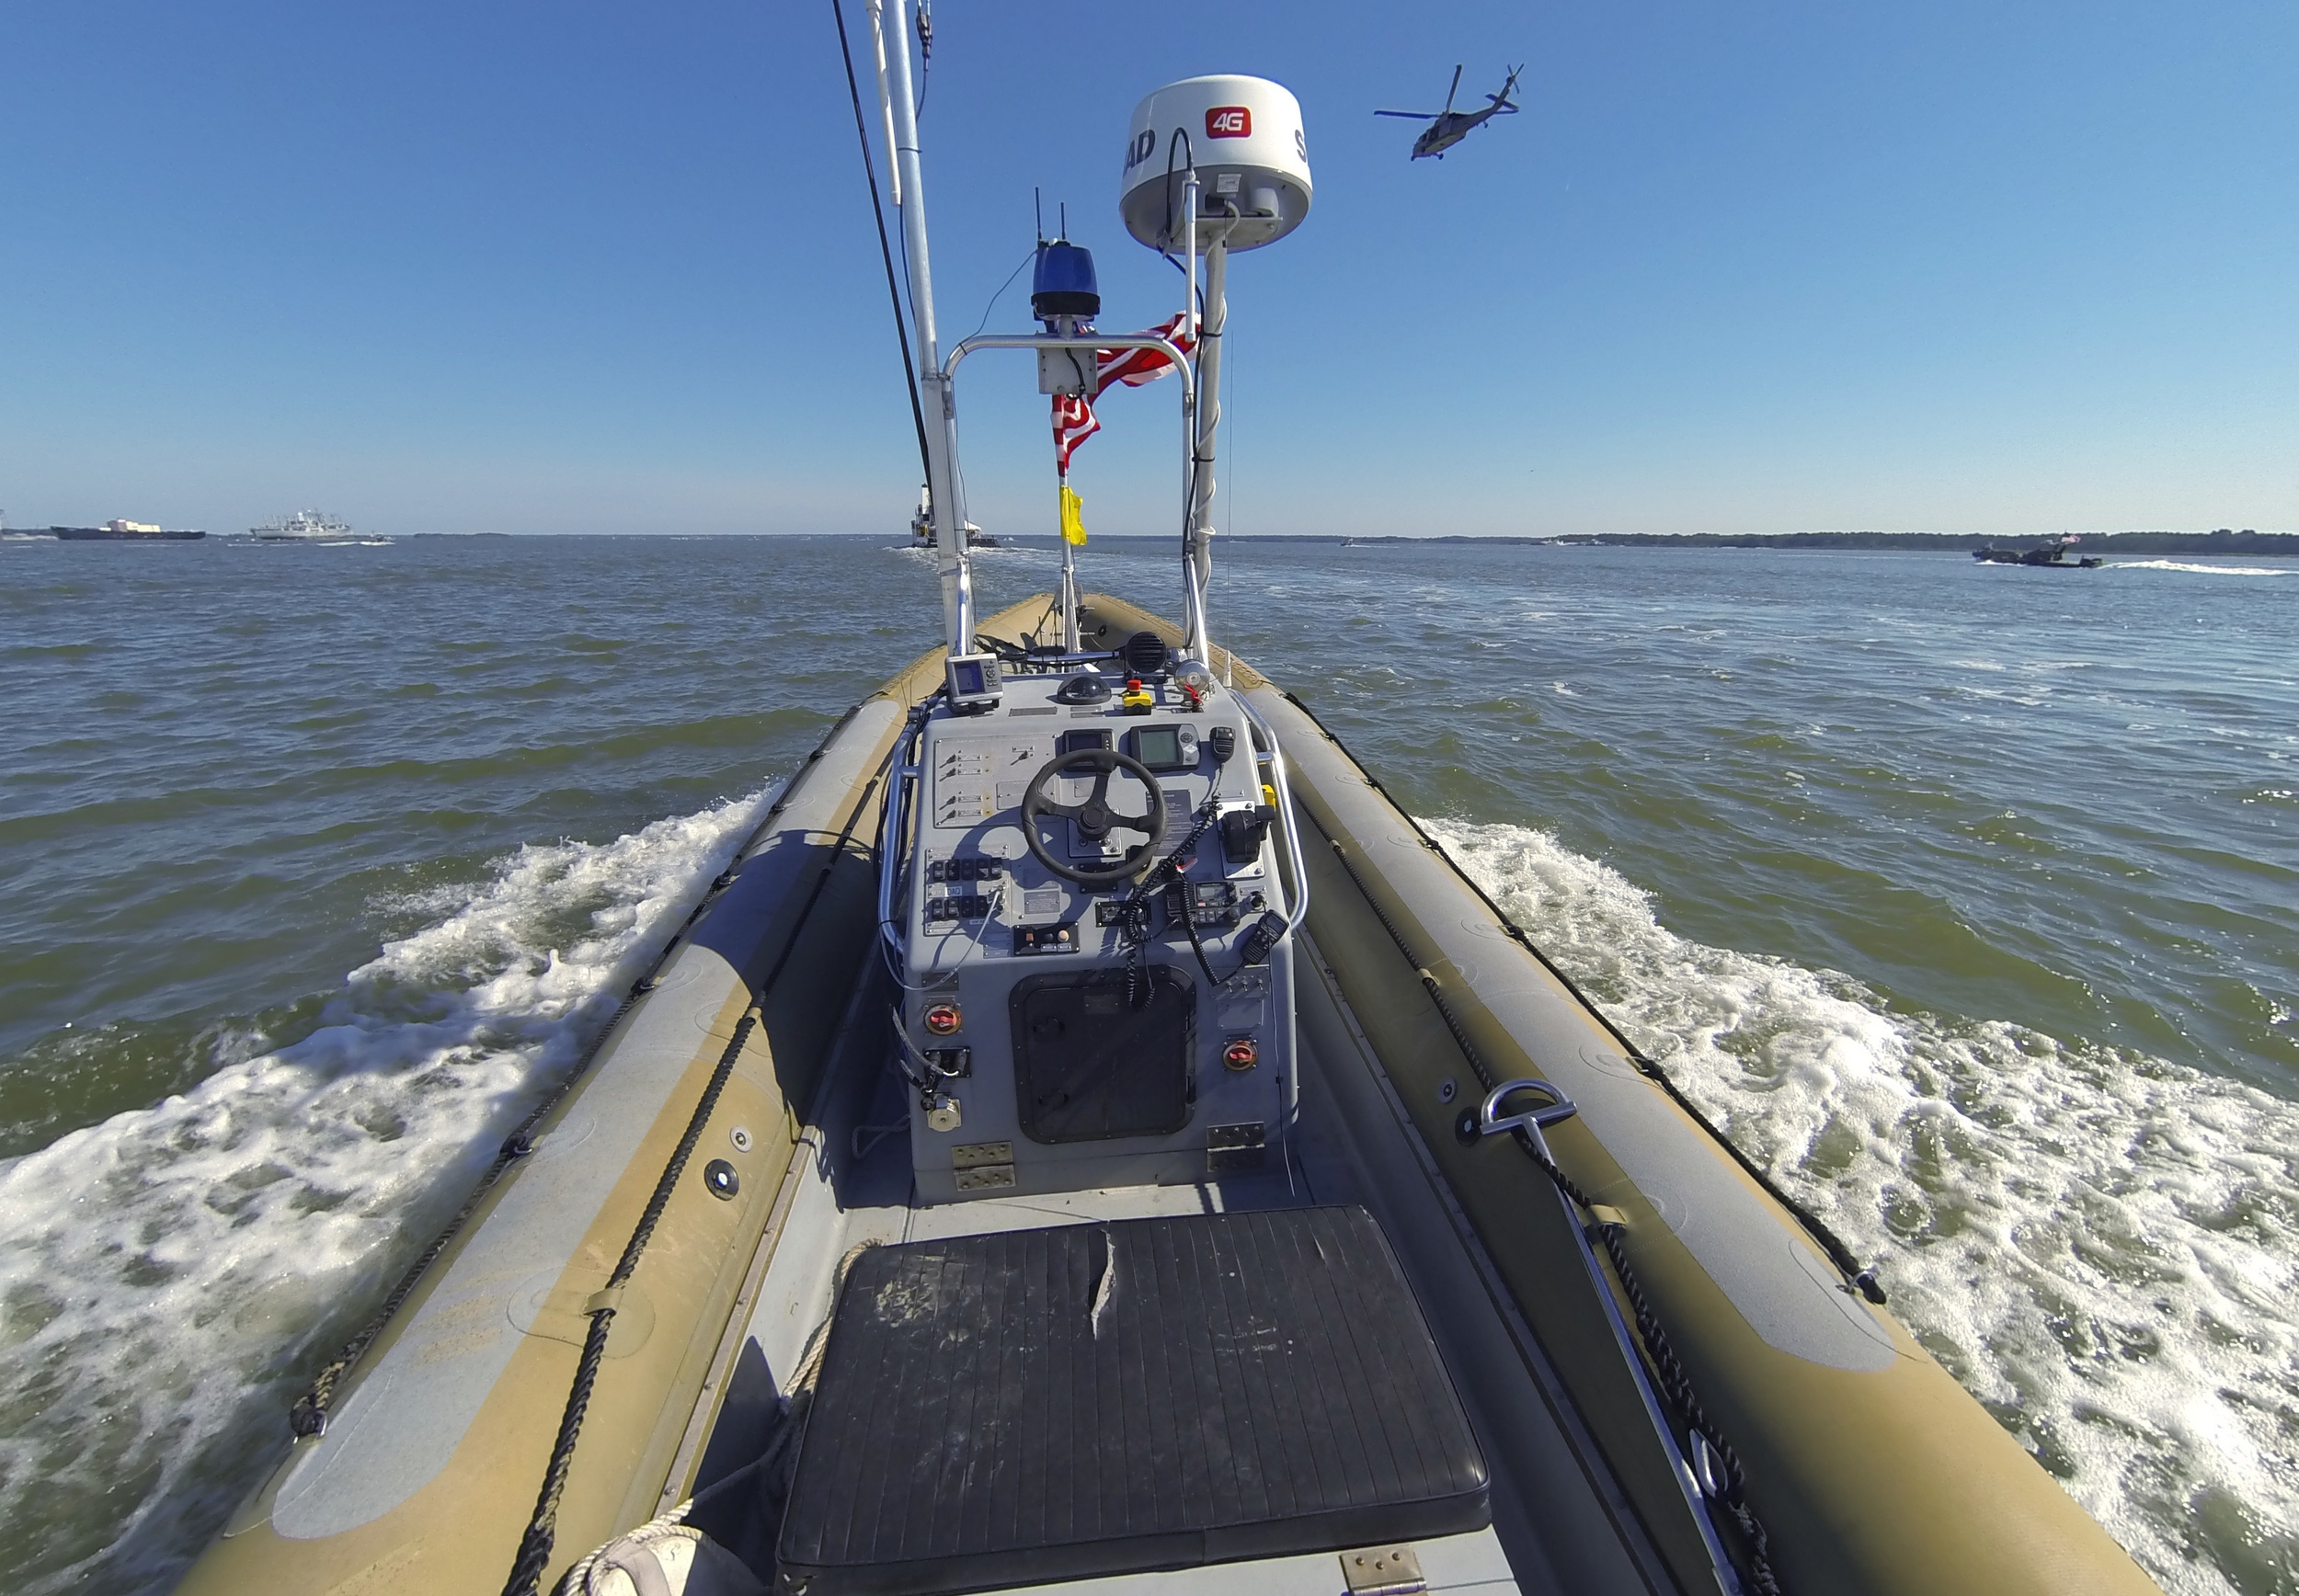   NEWPORT NEWS, Va.  - An unmanned seven meter rigid hulled inflatable boat (RHIB) operates autonomously during an Office of Naval Research (ONR)-sponsored demonstration of swarmboat technology held on the James River in Newport News, Va. 